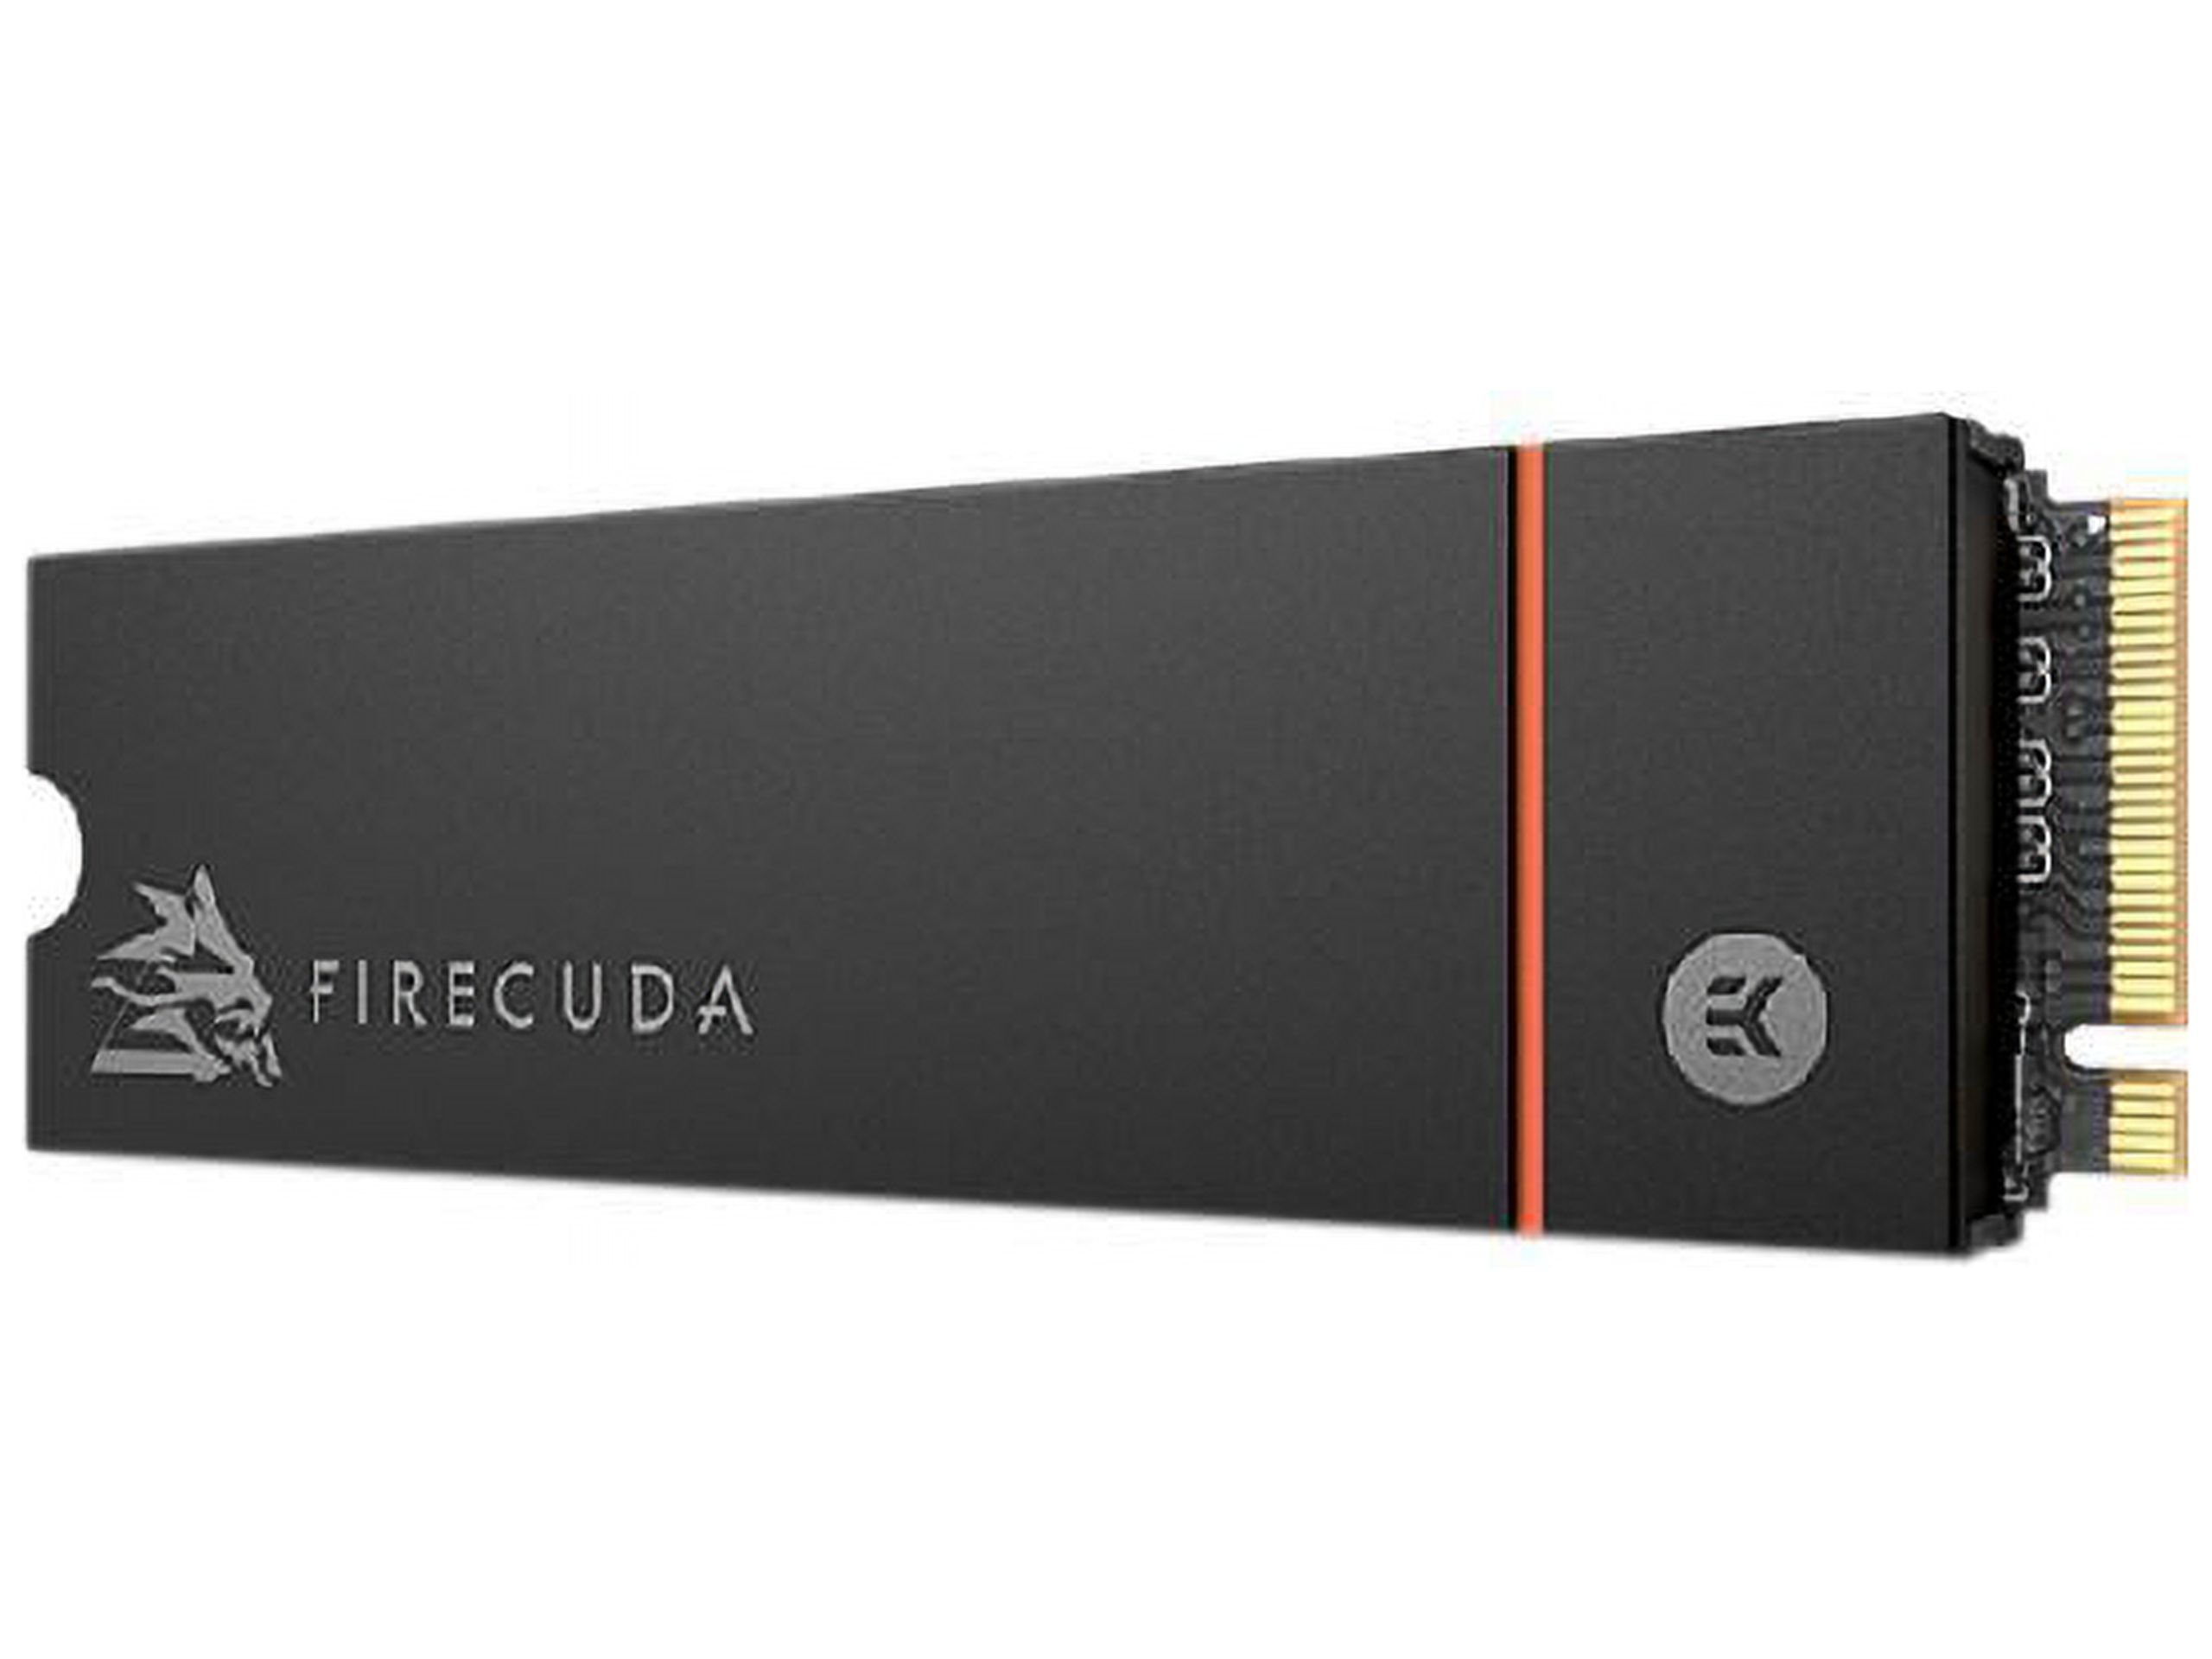 Seagate FireCuda 530 M.2 2280 4TB PCIe Gen4 x4 NVMe 1.4 3D NAND Internal Solid State Drive (SSD) ZP4000GM3A023 - image 3 of 5